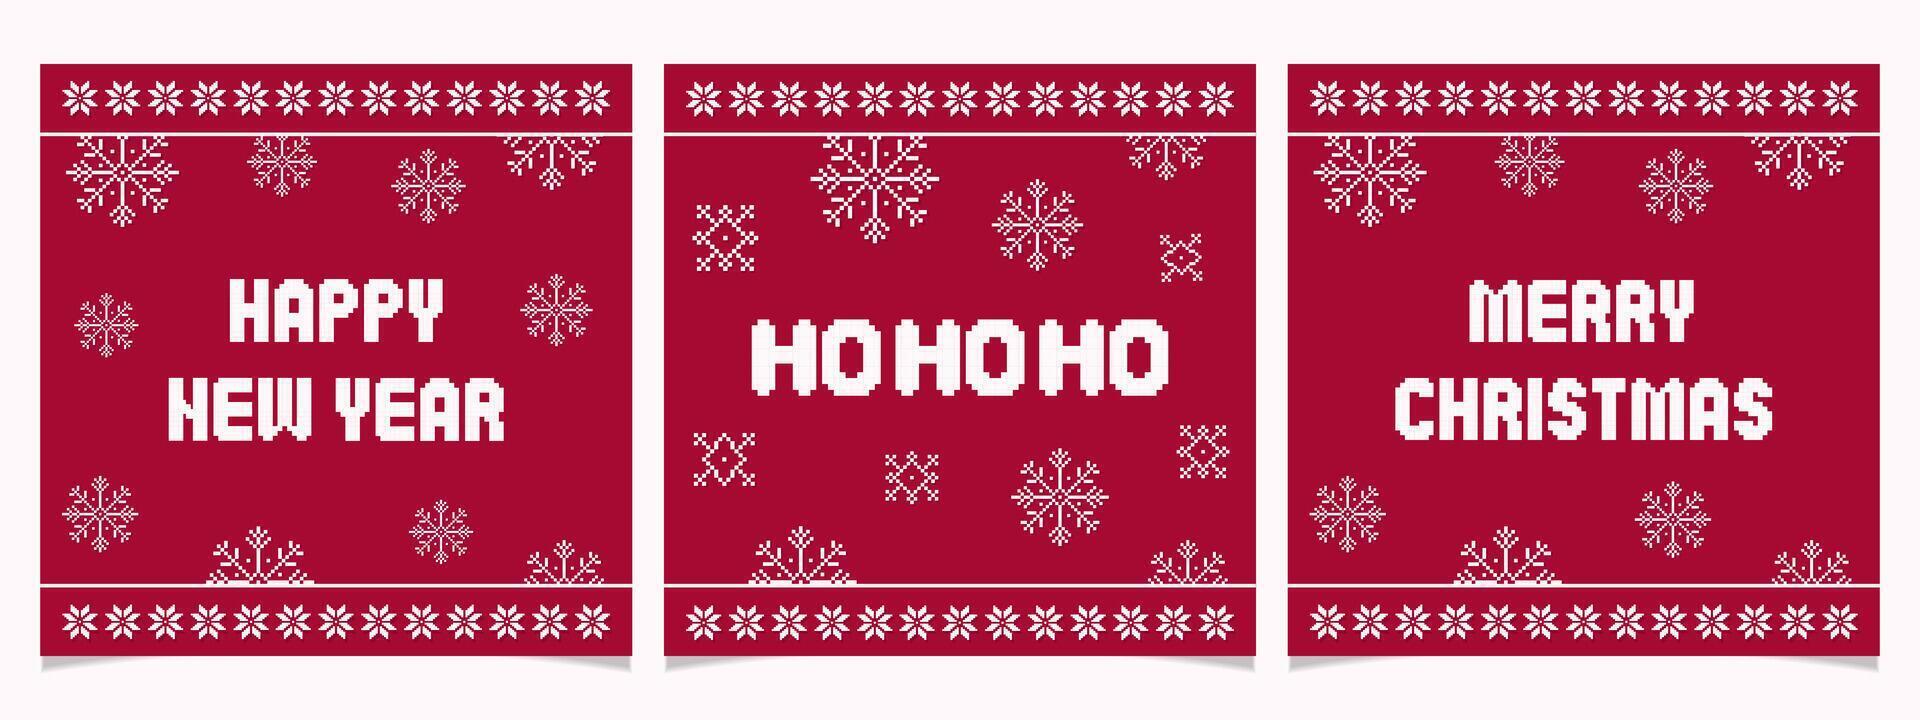 Pixel Christmas and New Year cards set with snowflakes.Pixelated simple and trendy winter decorations. December print. vector